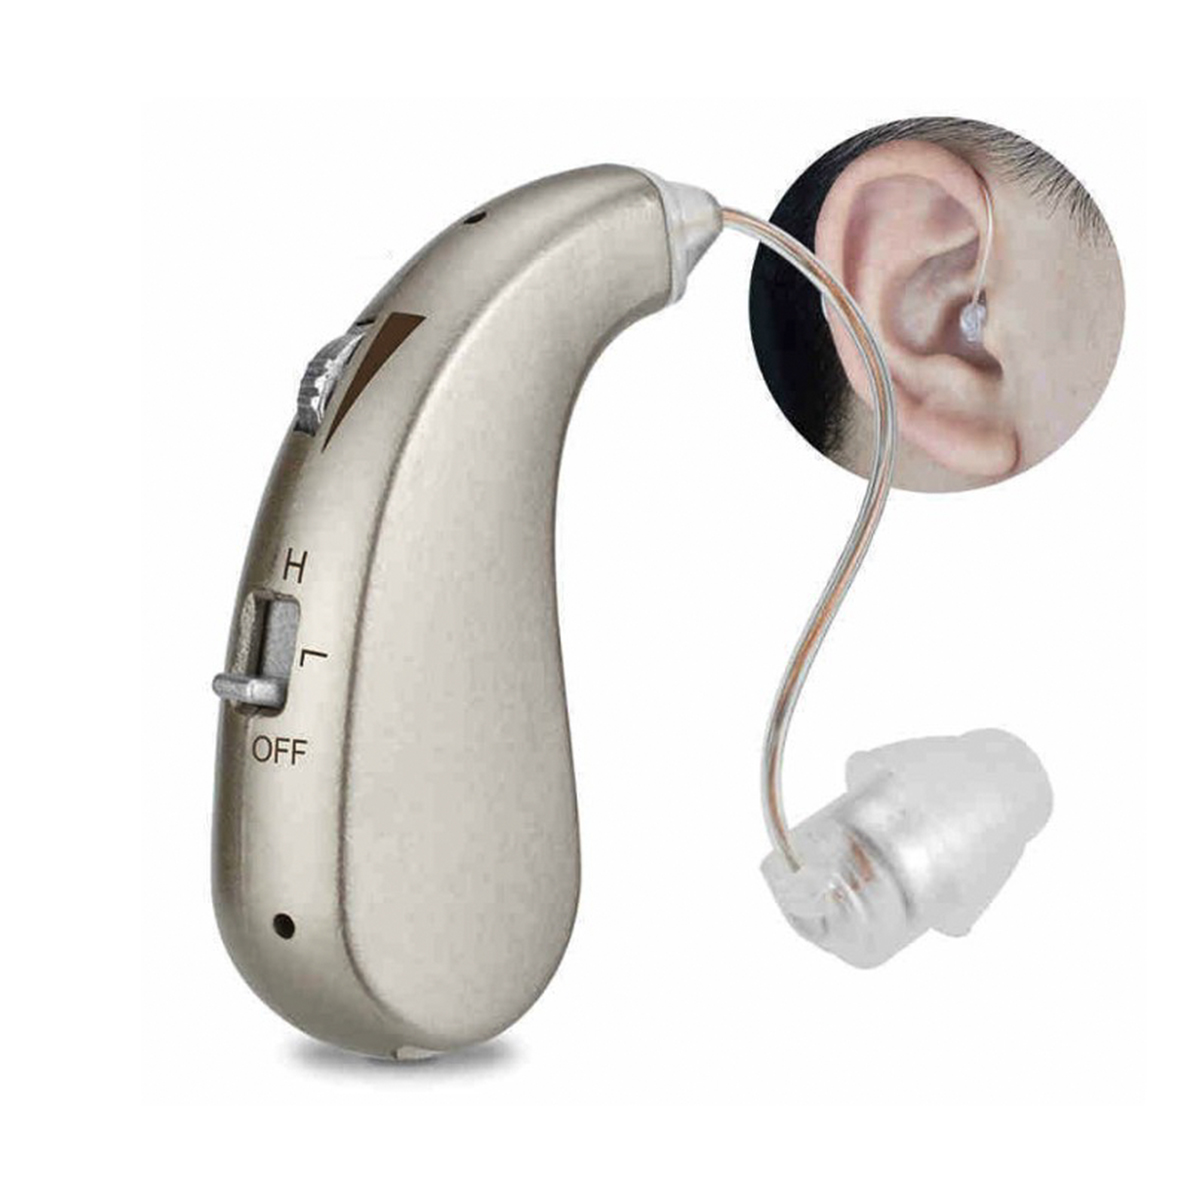 USB Rechargeable Portable Hidden Hearing Aid Sound Voice Amplifier with 4 Earplug